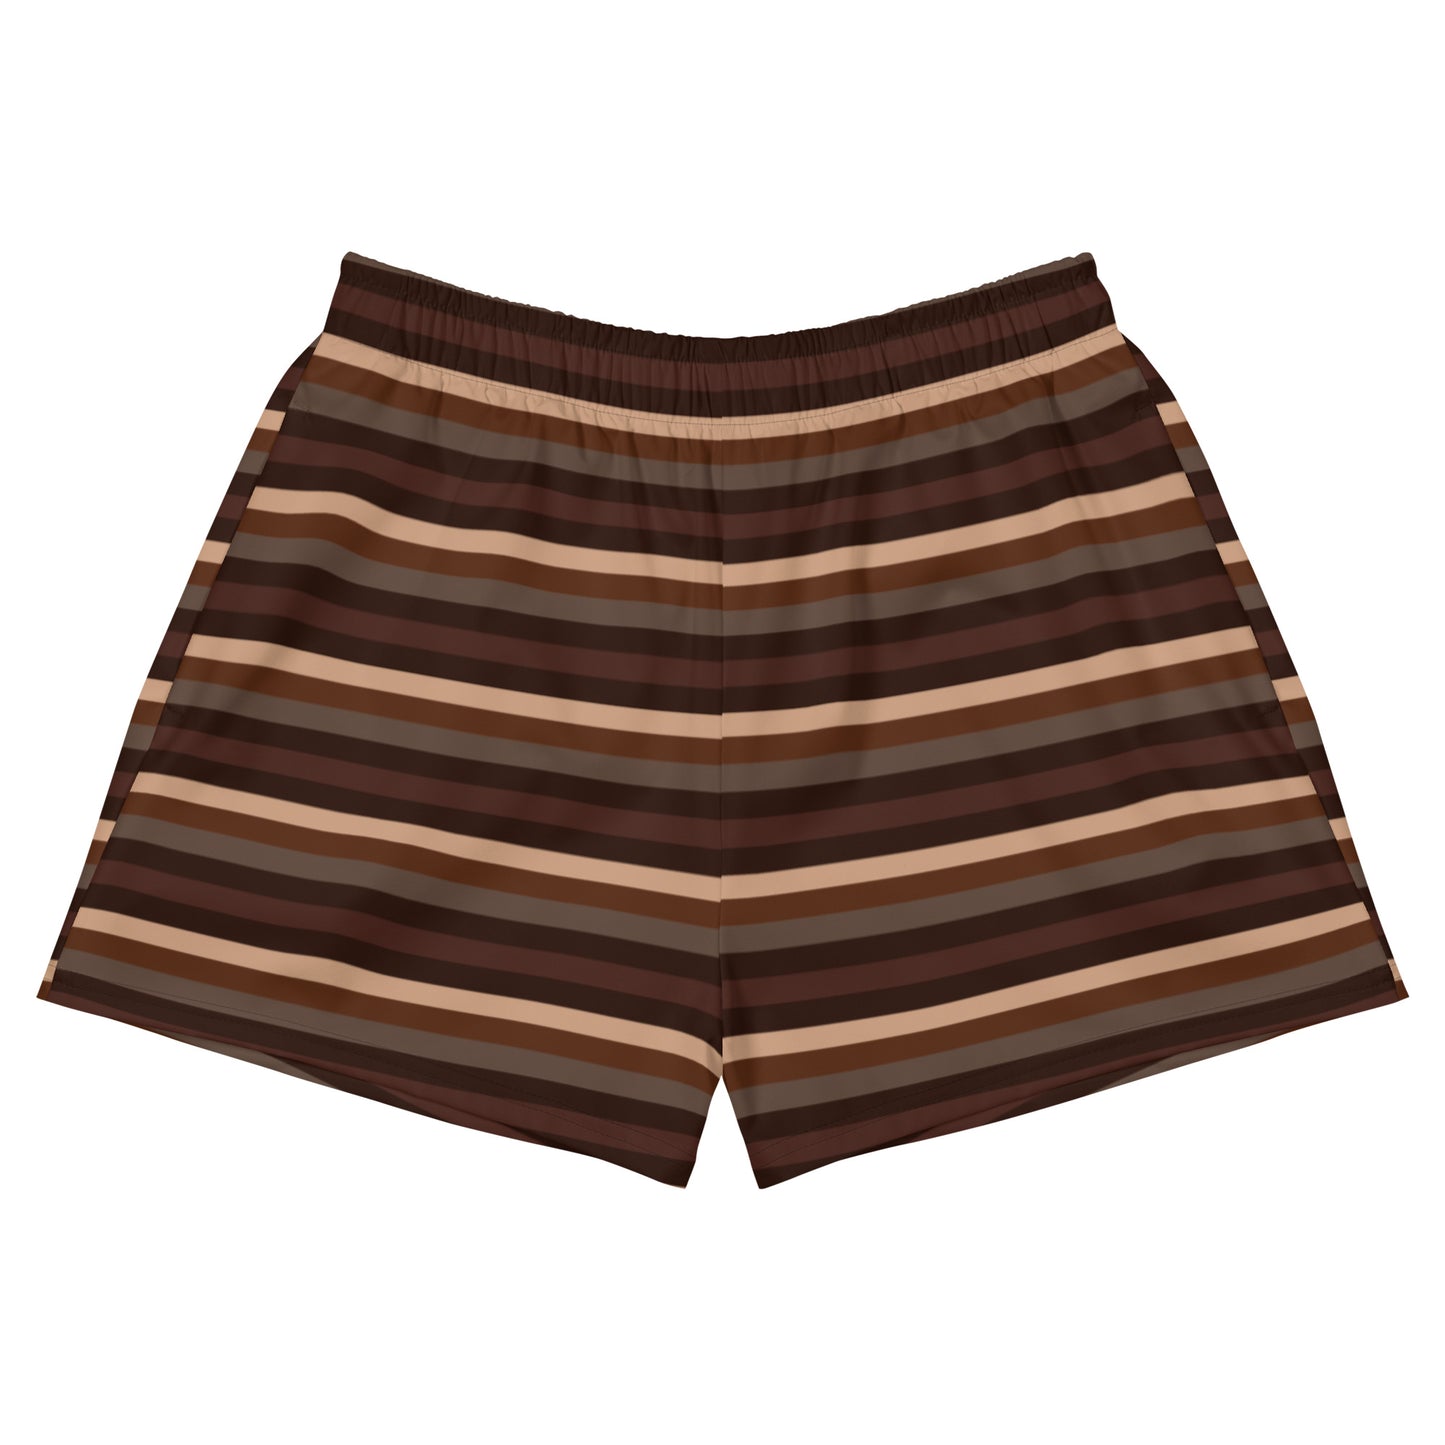 Retro Brown - Inspired By Taylor Swift - Sustainably Made Women’s Shorts